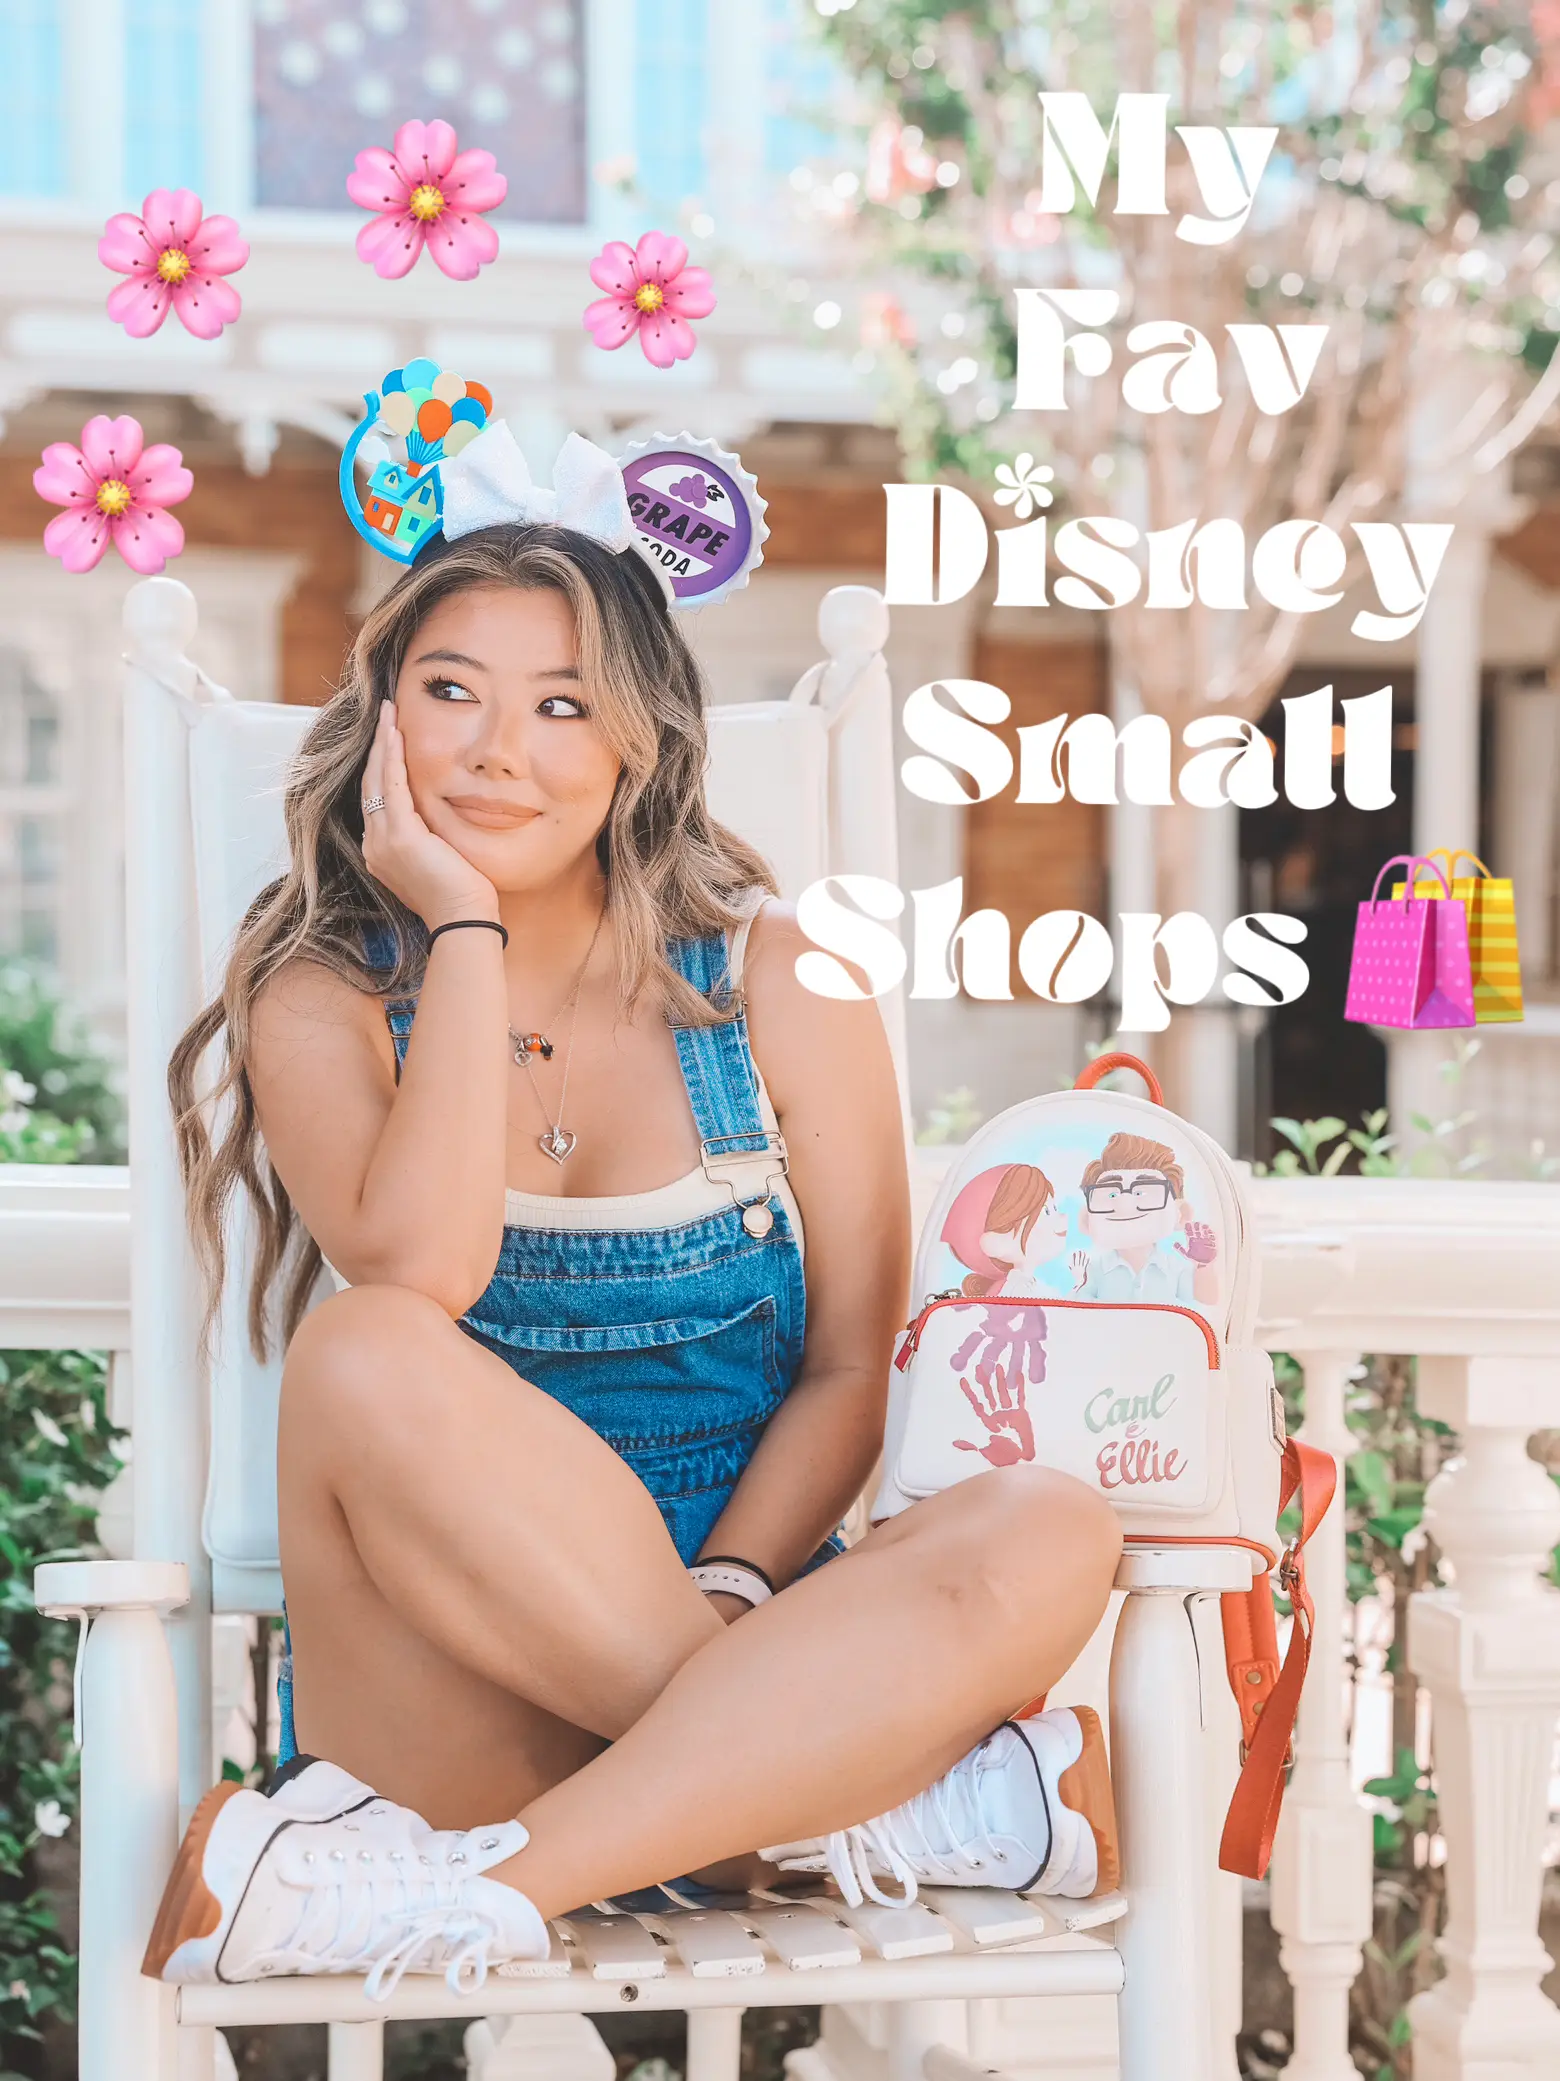  A woman is sitting on a bench with a sign that says "My Fav Disney Small Shops."